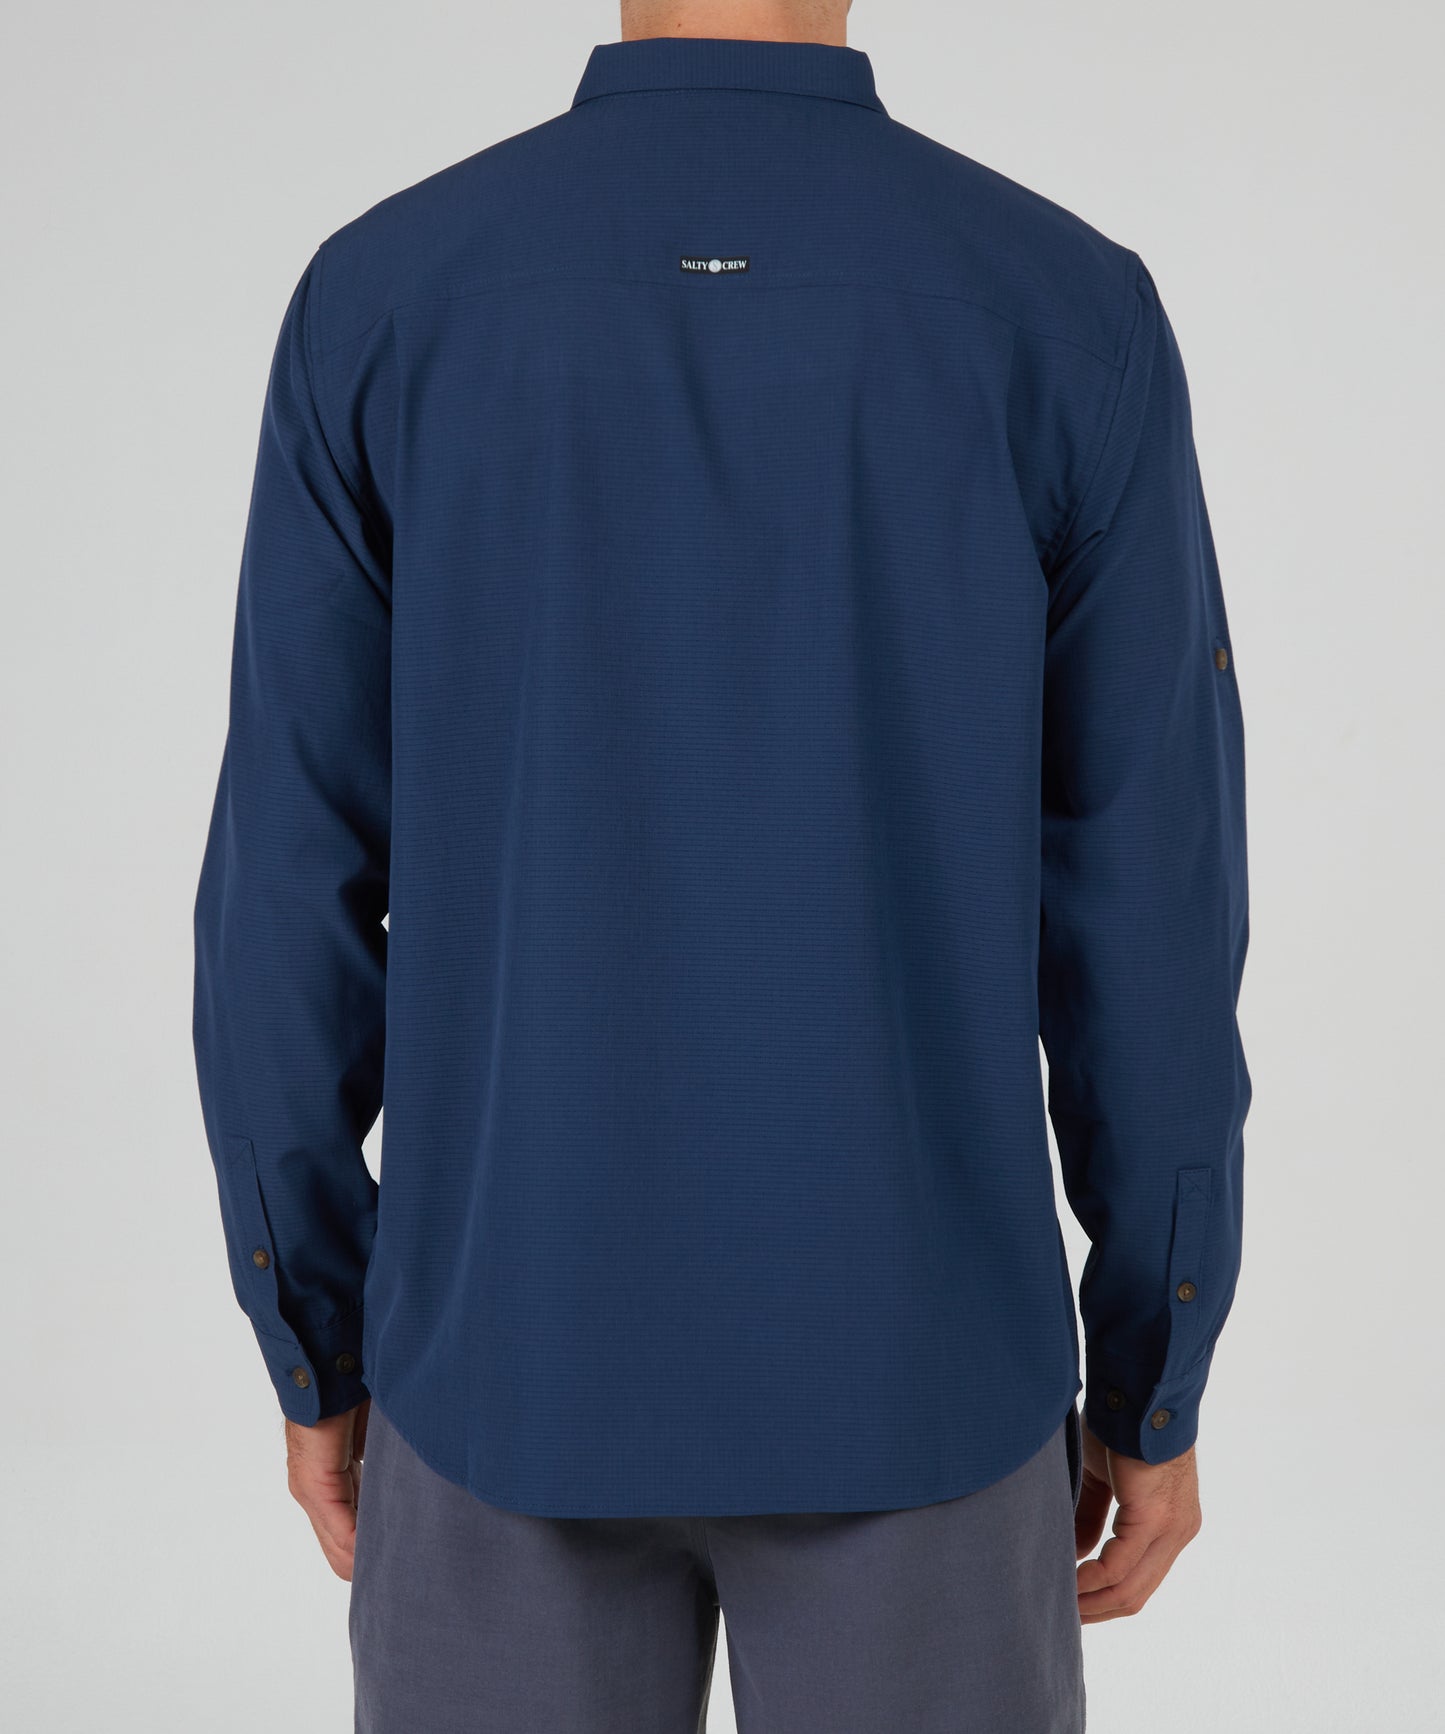 back view of Skipper Perforated Navy L/S Tech Woven